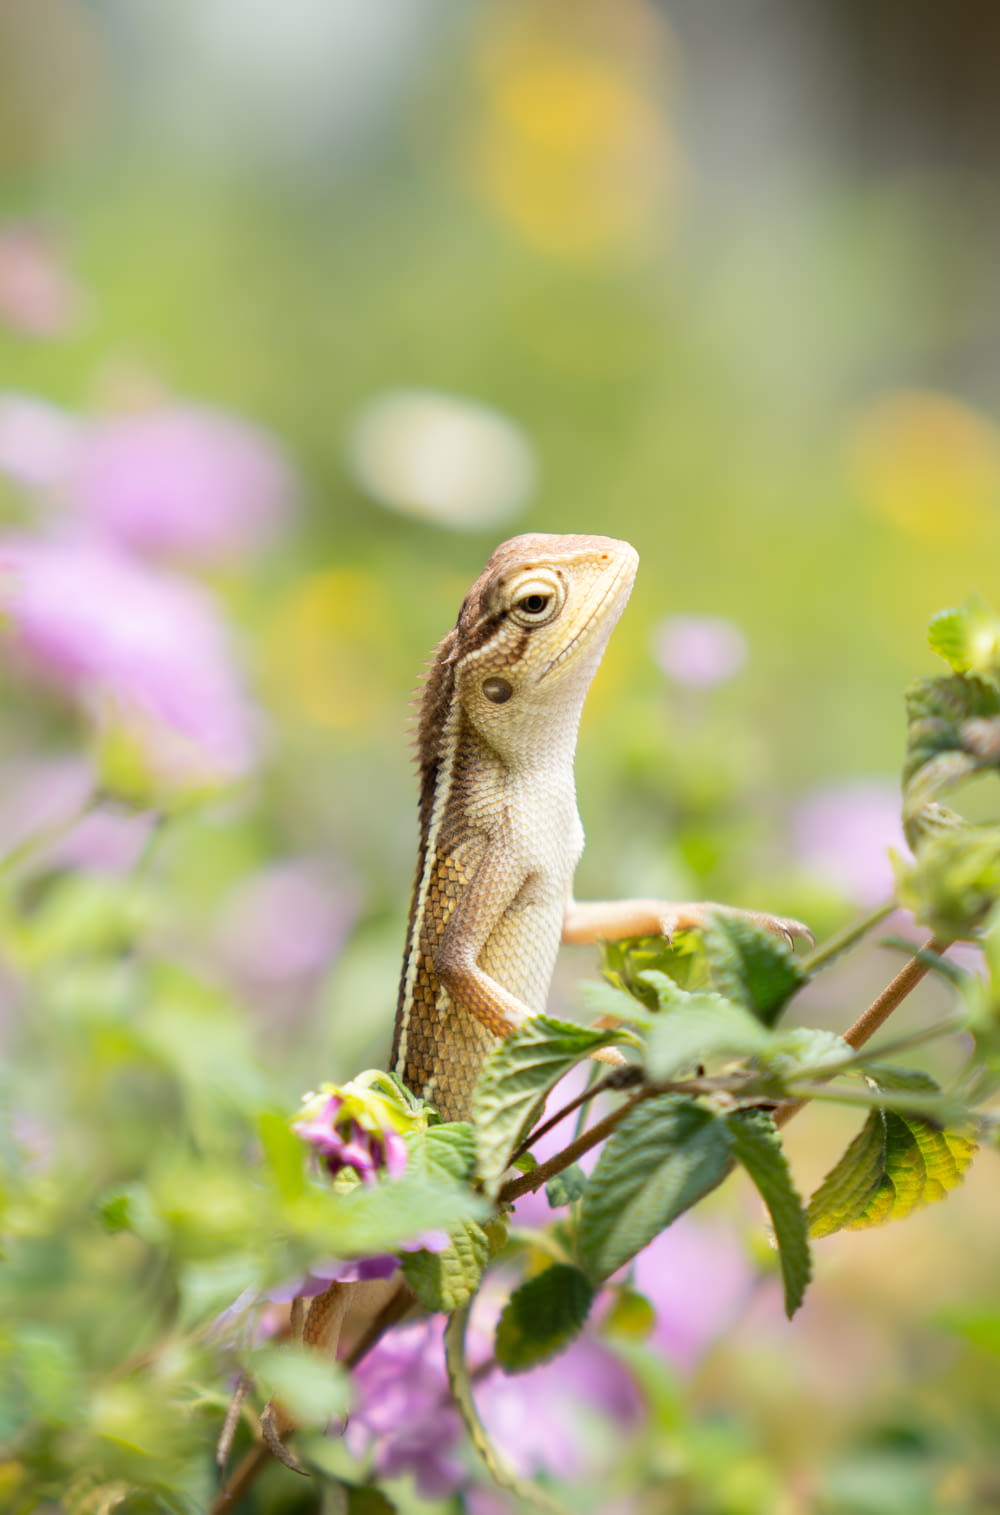 a small lizard on a plant